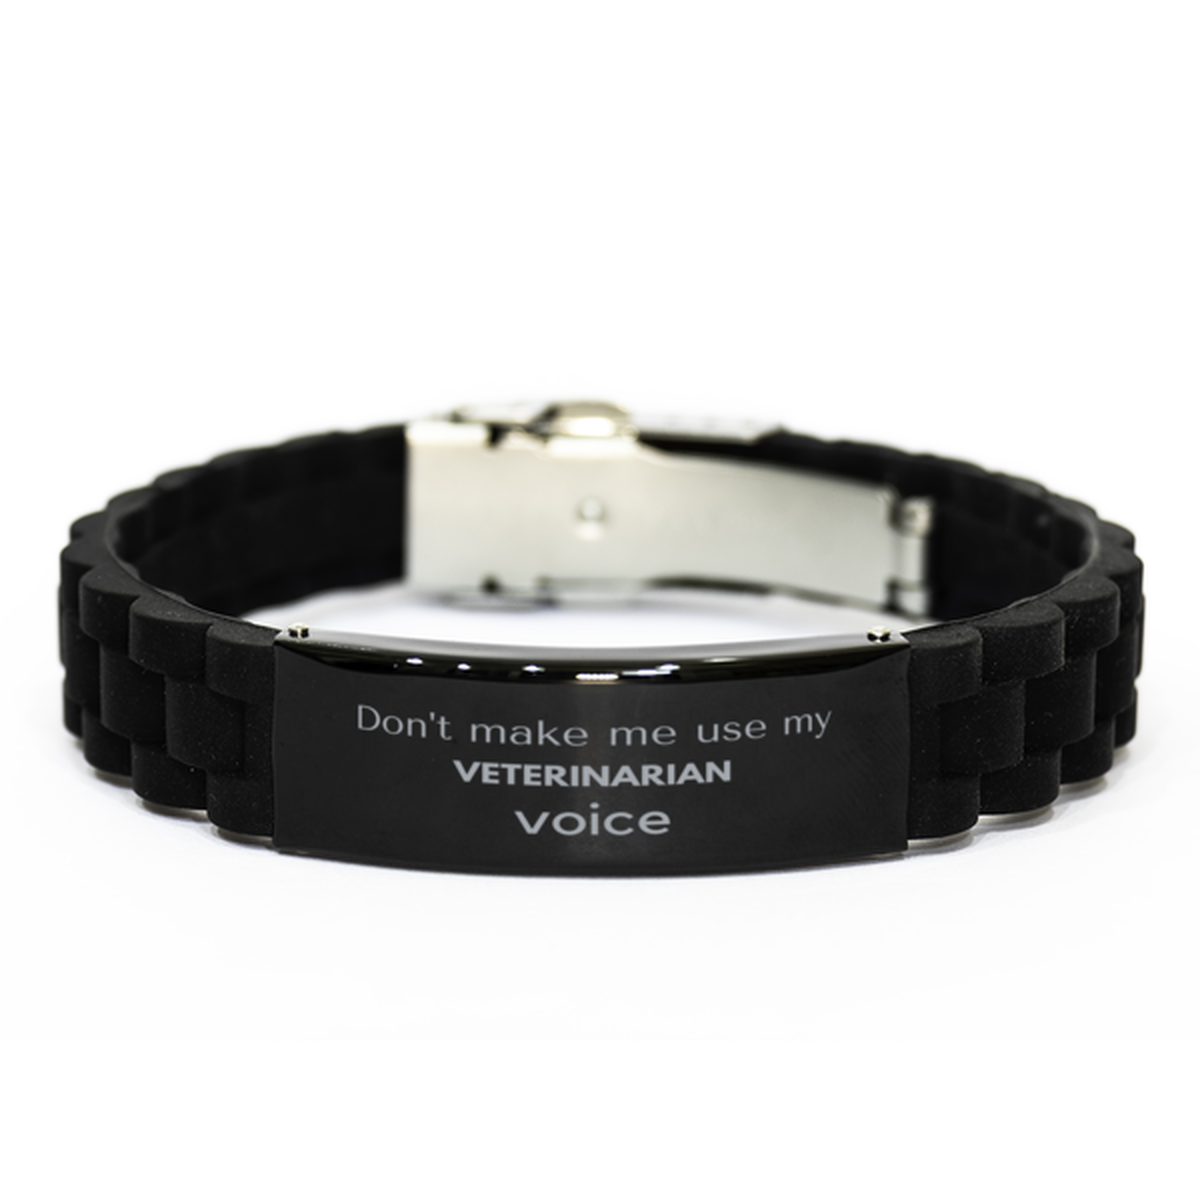 Don't make me use my Veterinarian voice, Sarcasm Veterinarian Gifts, Christmas Veterinarian Black Glidelock Clasp Bracelet Birthday Unique Gifts For Veterinarian Coworkers, Men, Women, Colleague, Friends